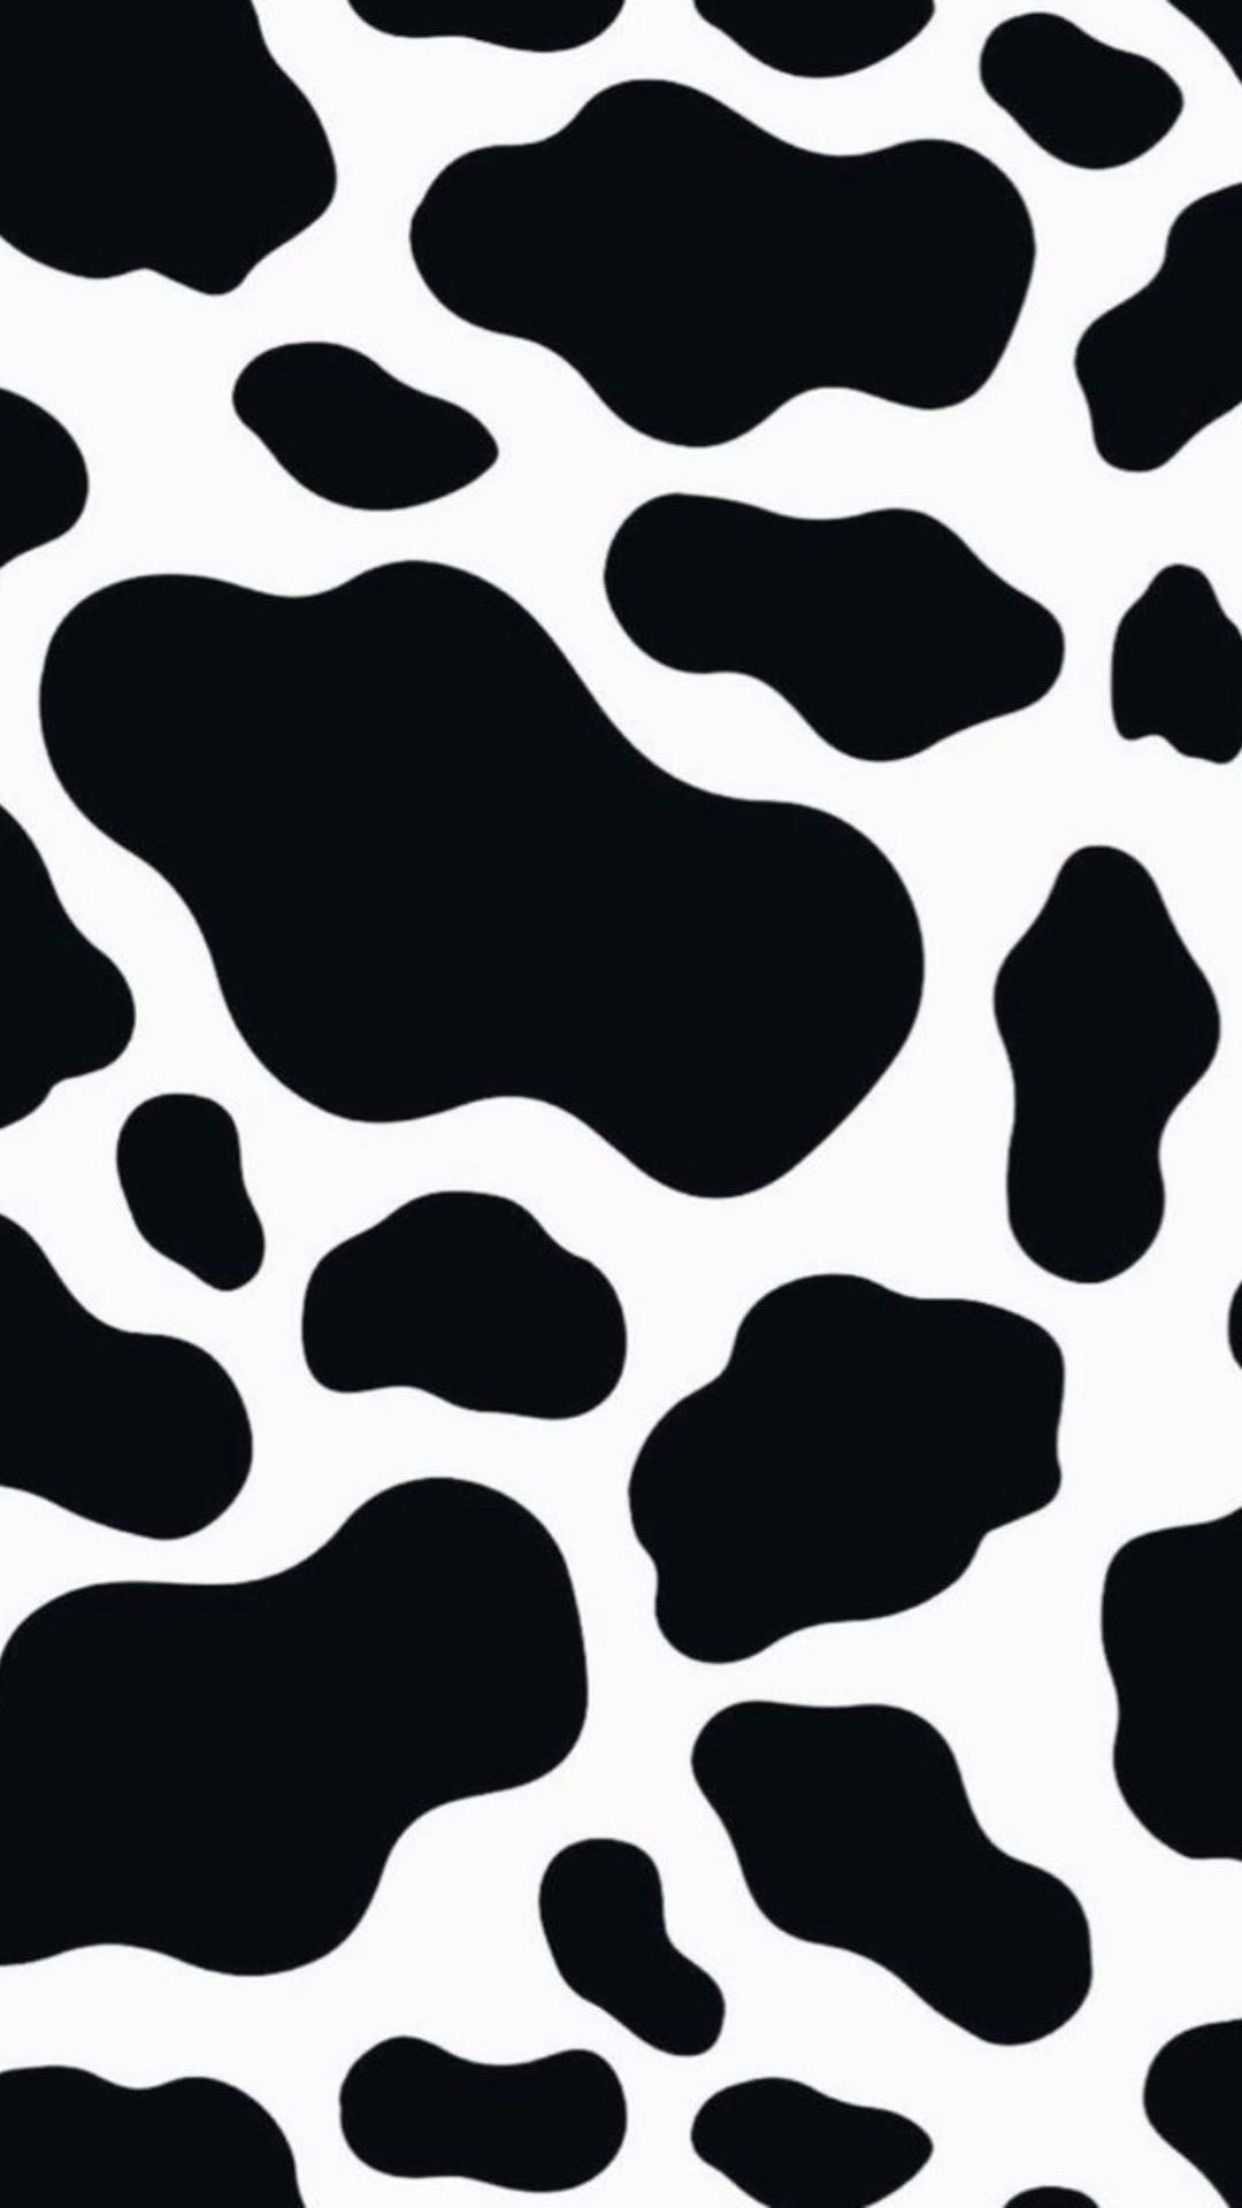 A black and white cow pattern - Cow